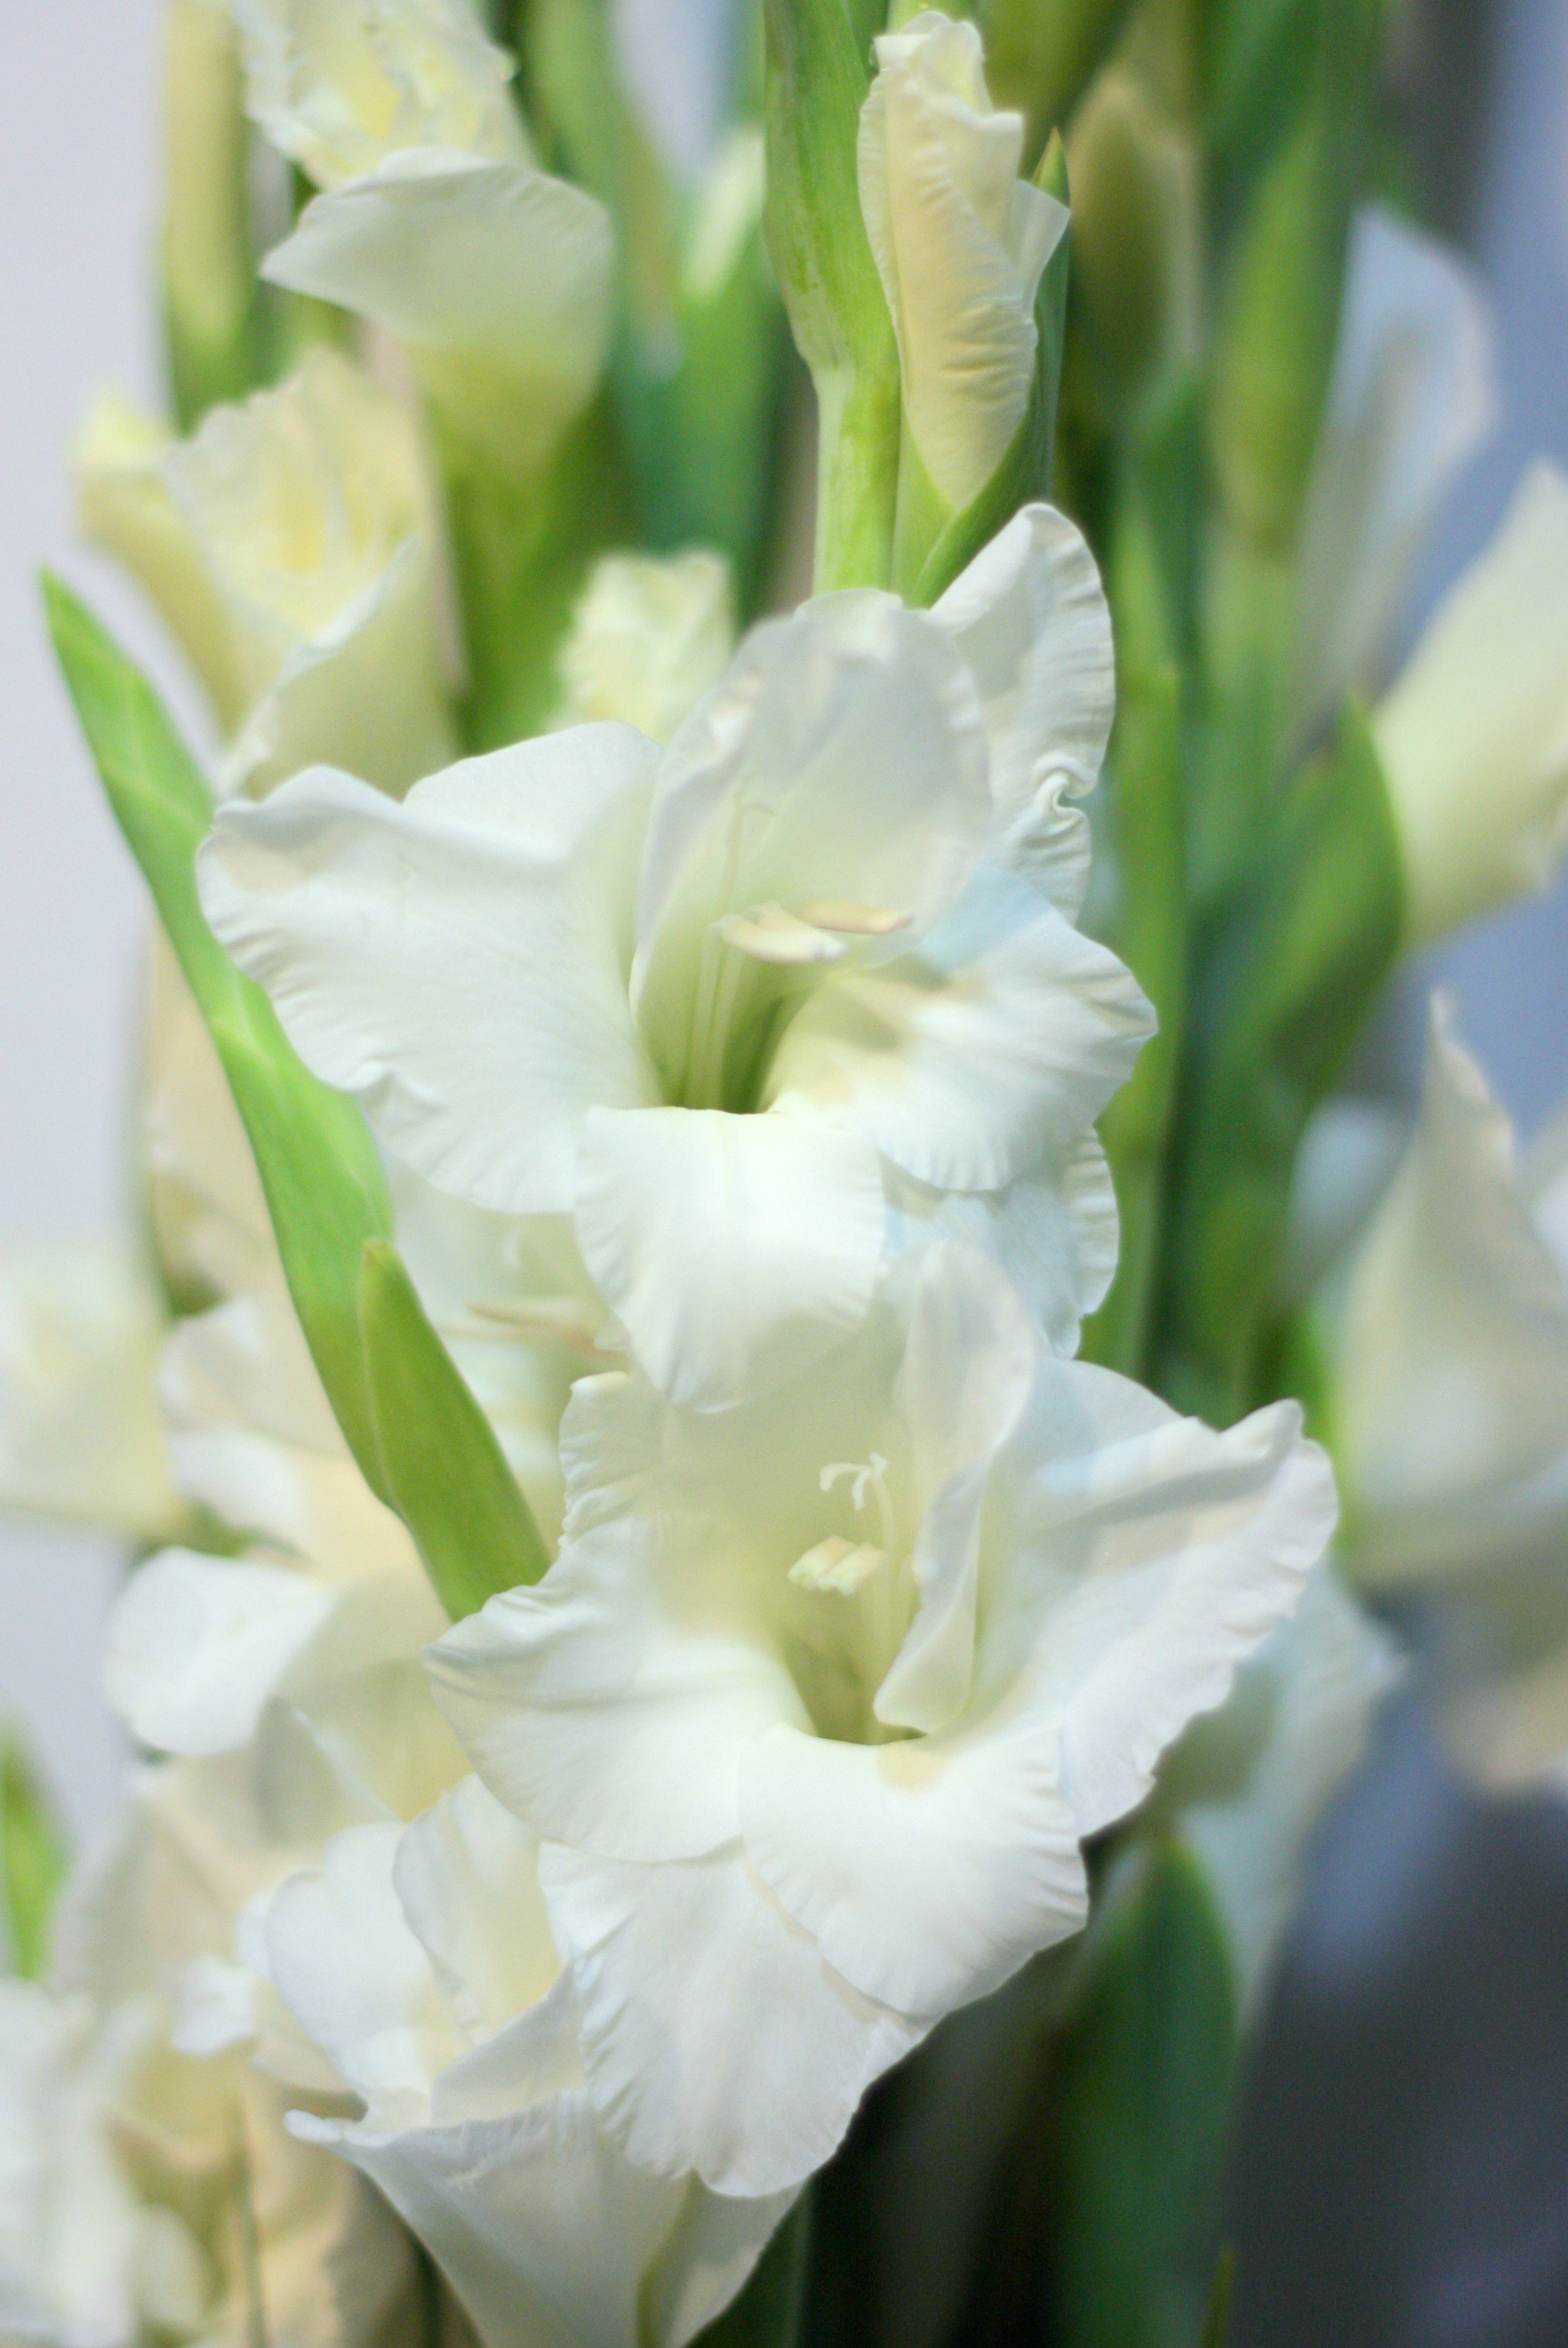 28 Wonderful Gladiolus Vase 2022 free download gladiolus vase of gladiolus flowers pinterest gladiolus beautiful flowers and intended for white gladiolus